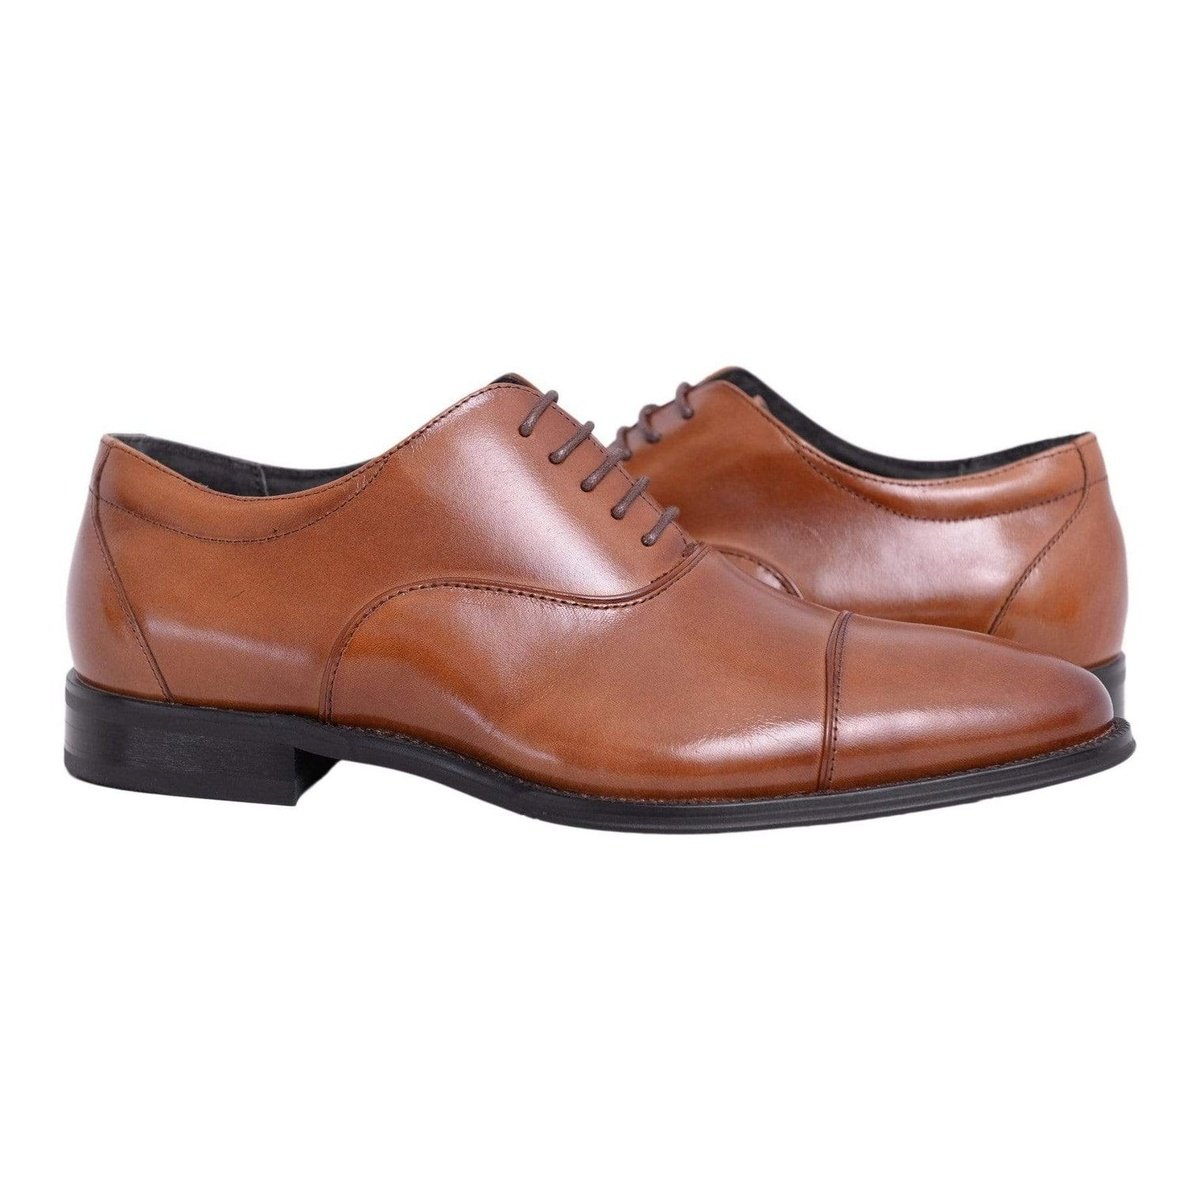 Stacy Adams Shoes For Amazon 9 D-M Stacy Adams Kordell Cognac Oxford Cap Toe Leather Dress Shoes